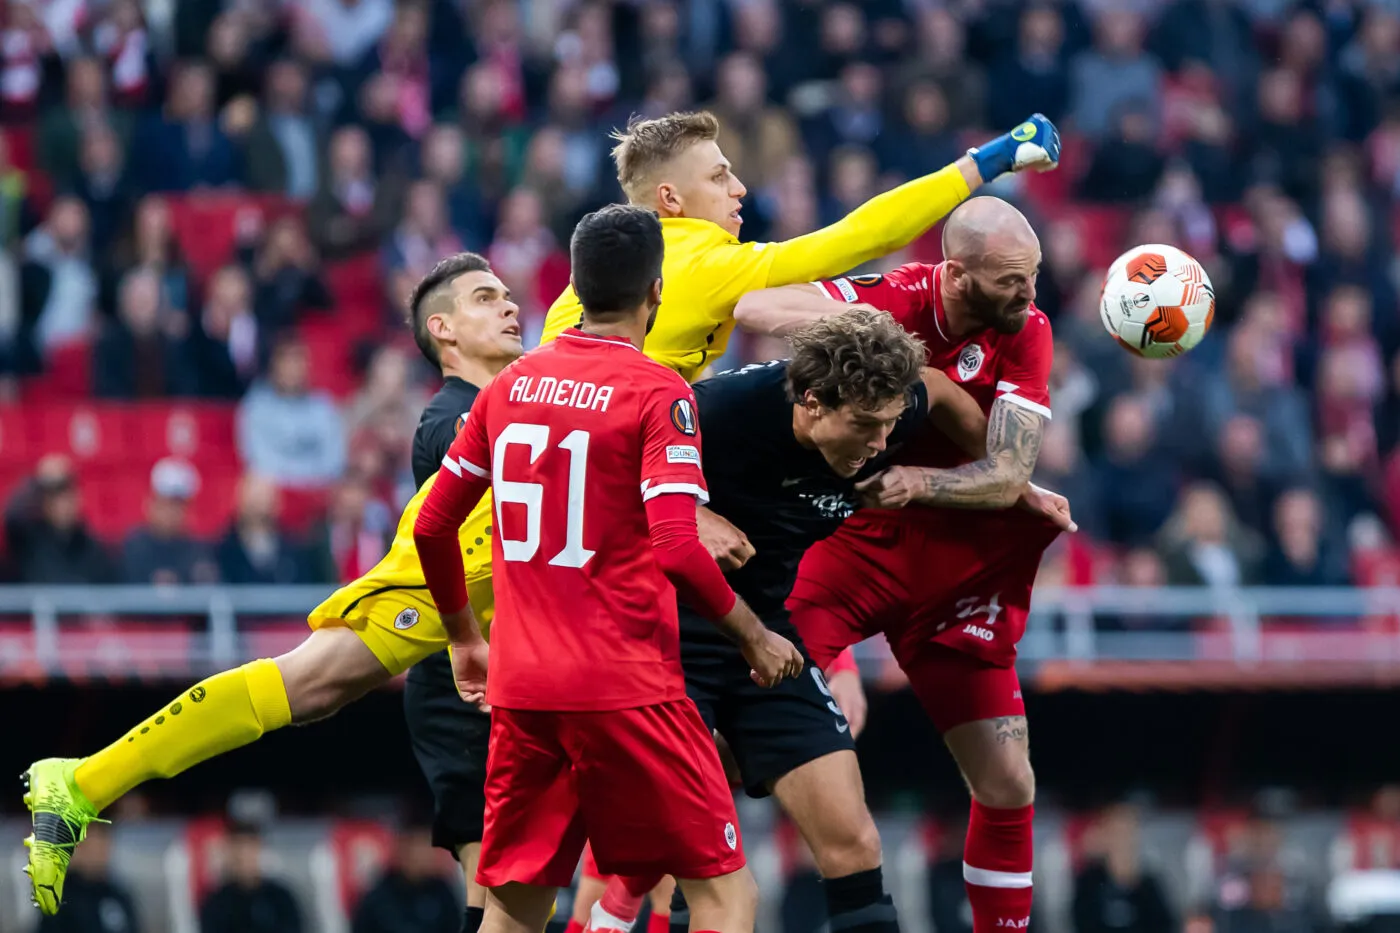 Antwerp's goalkeeper Jean Butez, Eintracht's Sam Lammers and Antwerp's Dorian Dessoleil pictured in action during a soccer game between Belgian Royal Antwerp FC and German Eindracht Frankfurt, Thursday 30 September 2021, in Antwerp, on the second day (out of six) of the Europa League group stage, in the Group D. BELGA PHOTO KRISTOF VAN ACCOM 